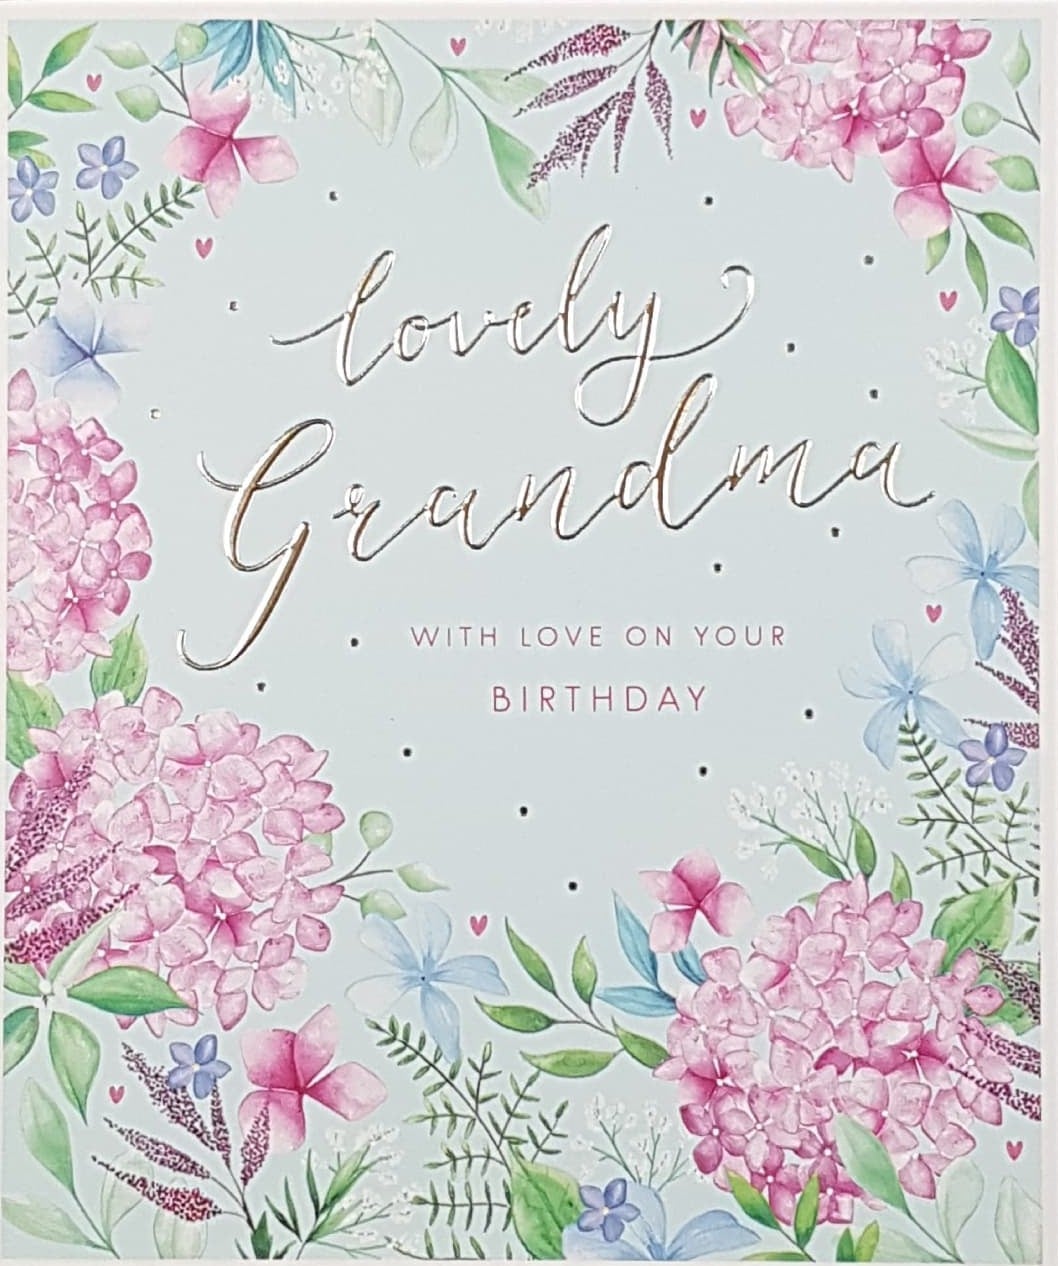 Birthday Card - Grandma / A Pink Floral Motive On A Green Front